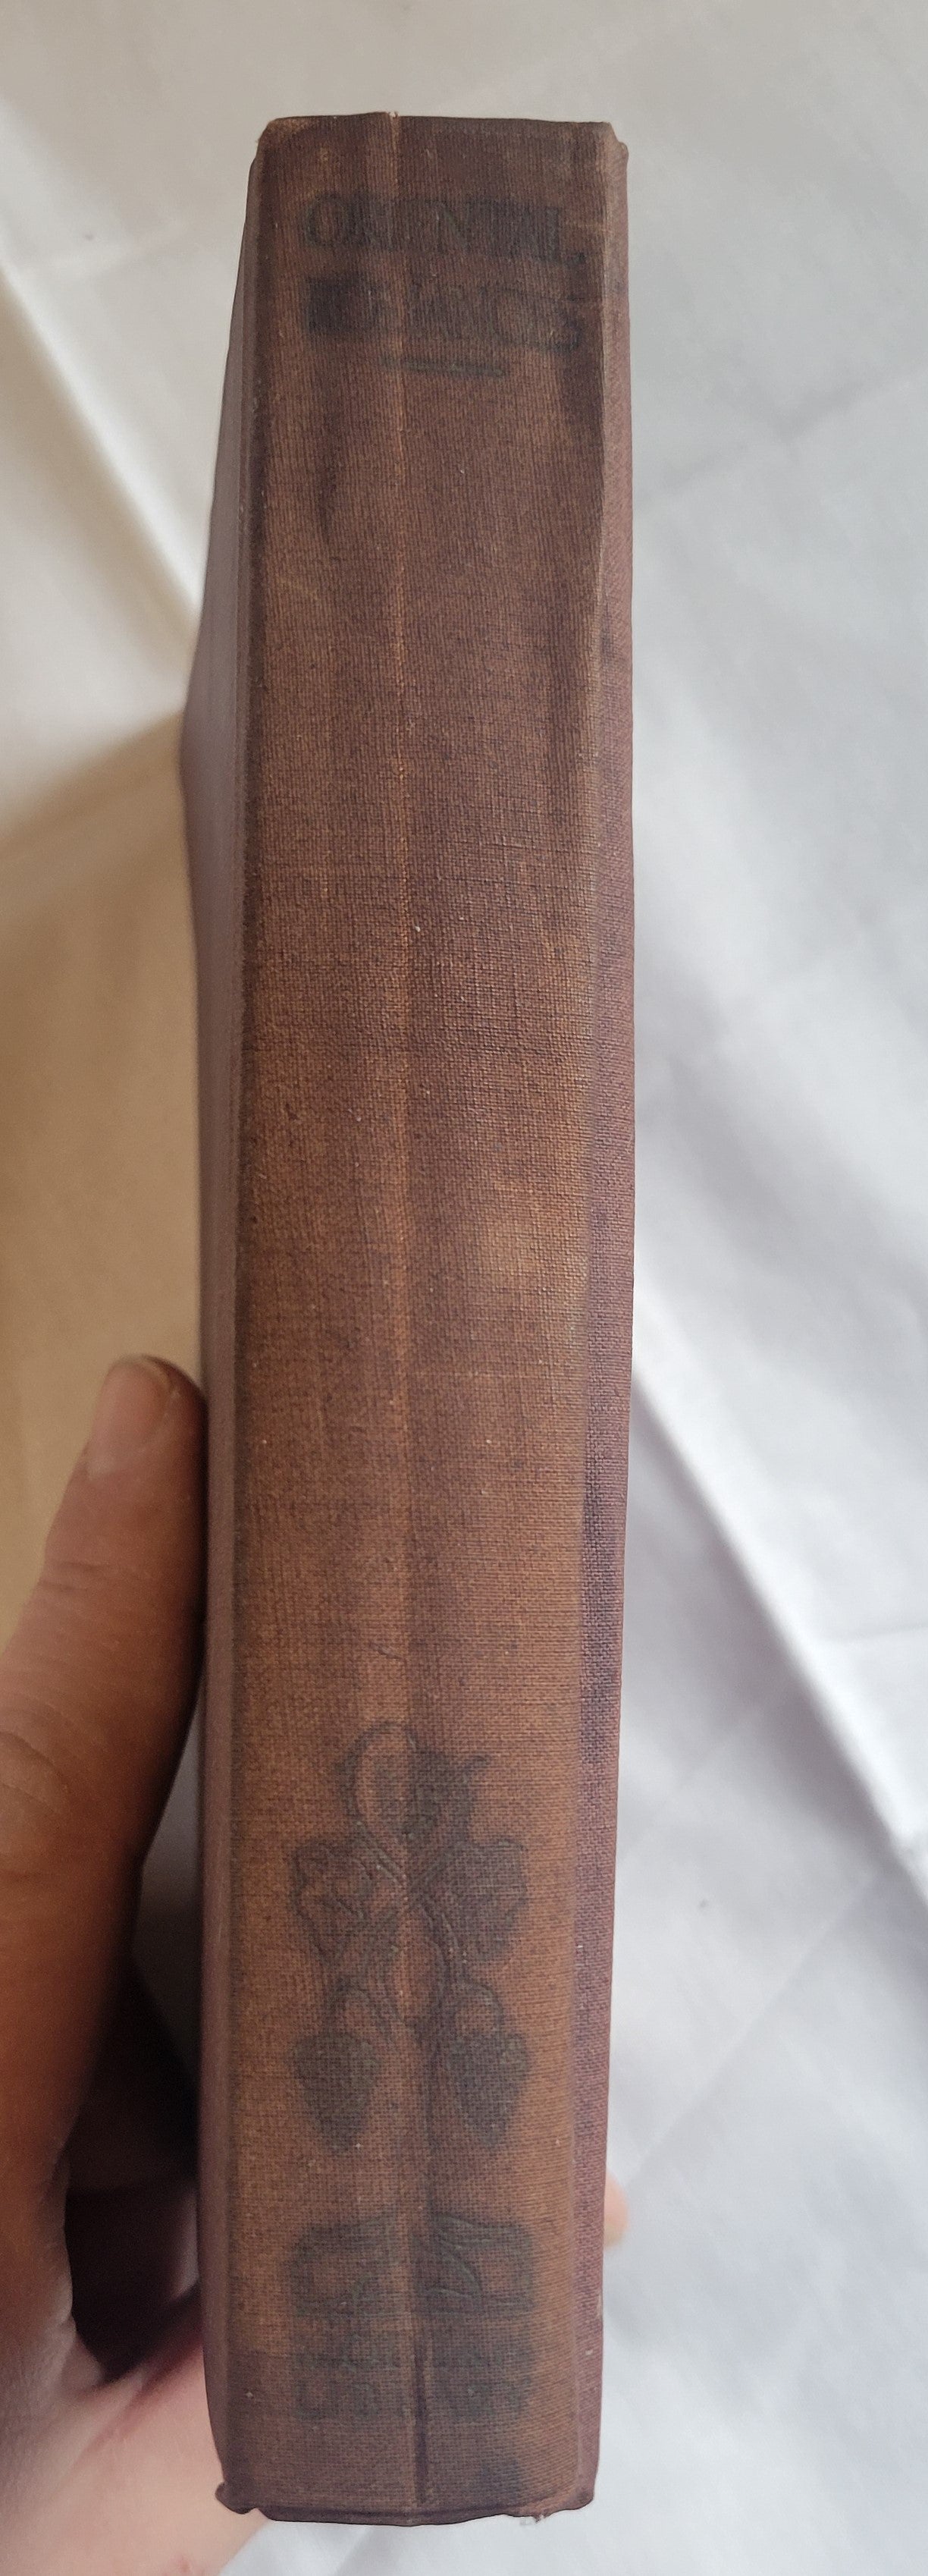 Vintage book for sale, "Oriental Romances" First Edition, edited and introduction by Manuel Komroff, published by The Modern Library in 1930. View of spine